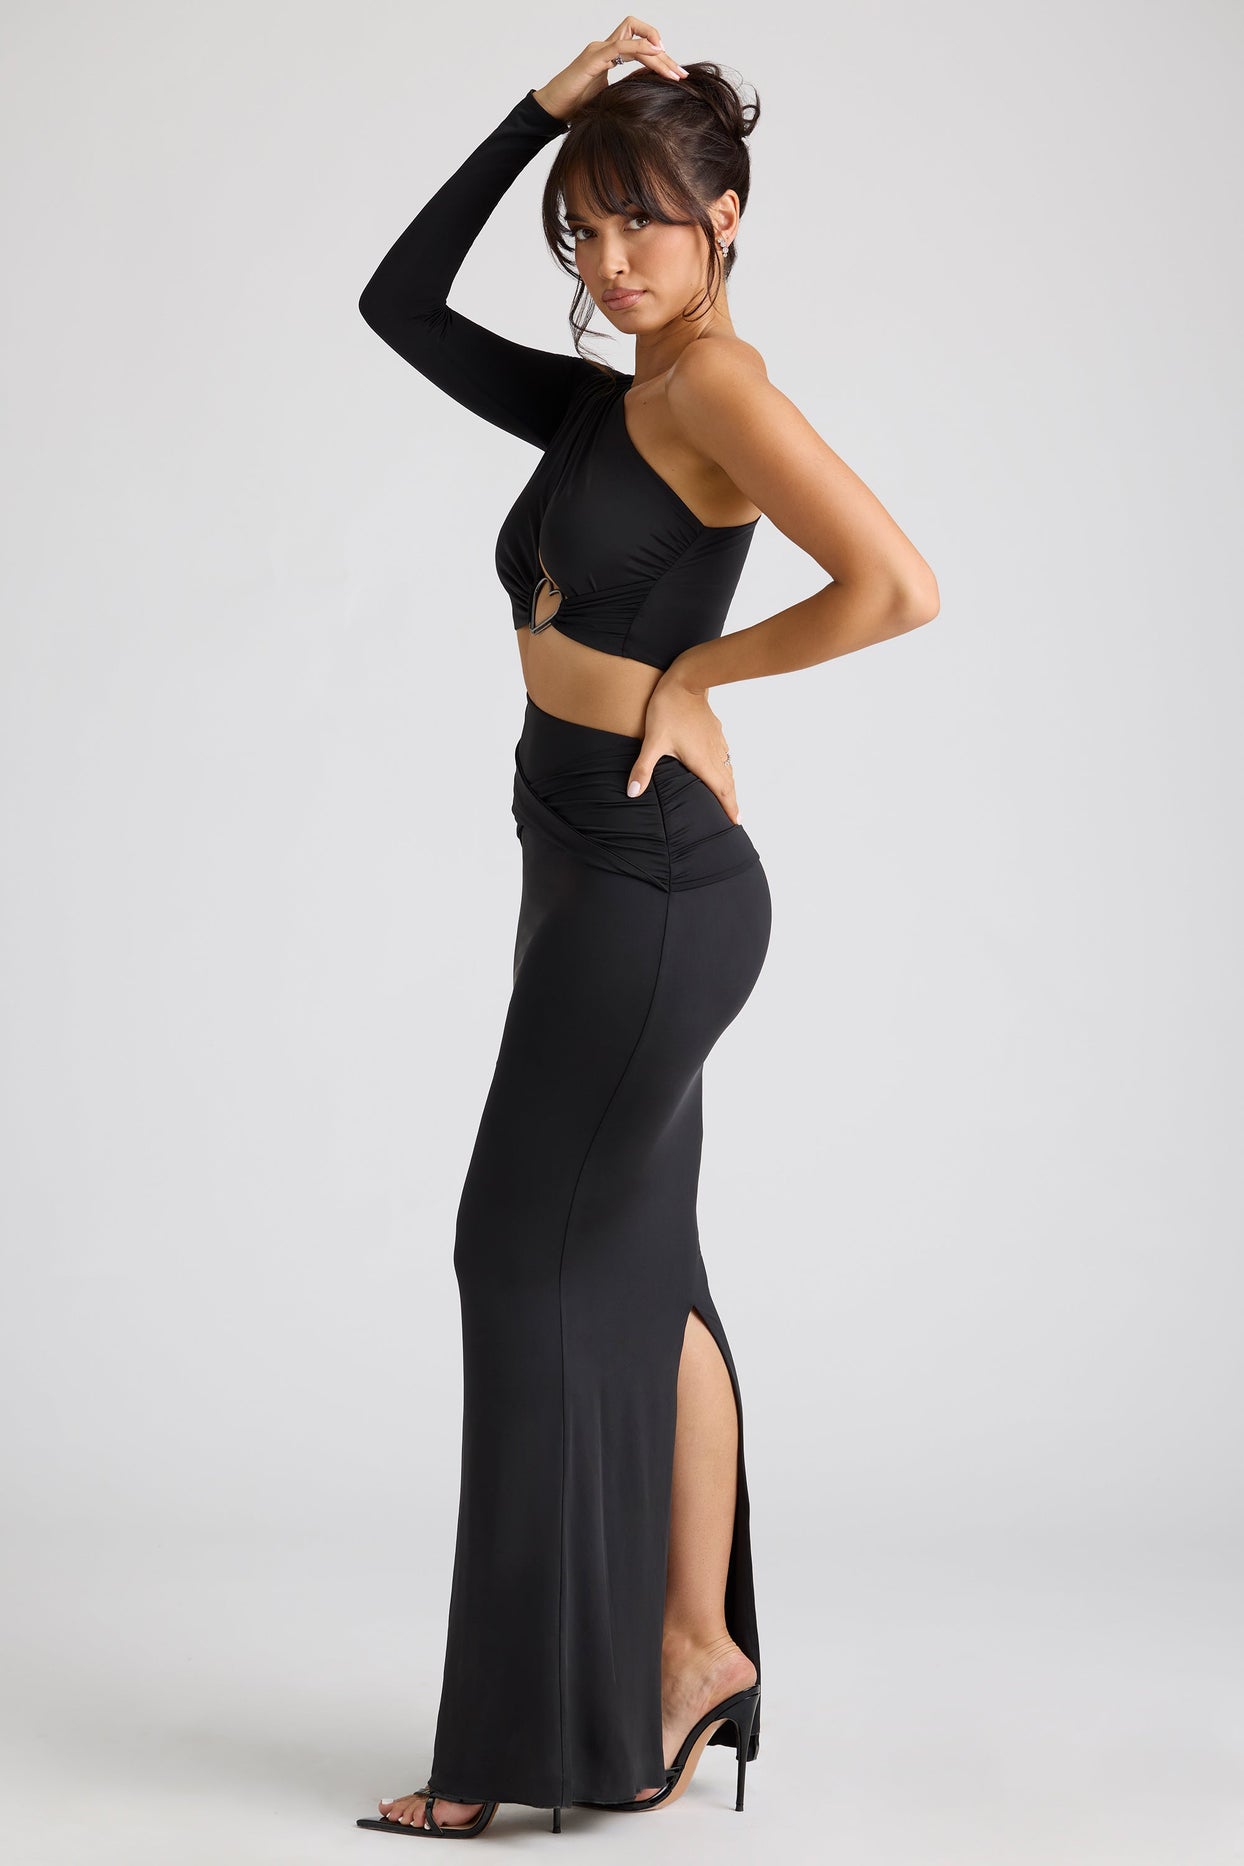 Estela Single Sleeve Cut Out Evening Gown in Black | Oh Polly